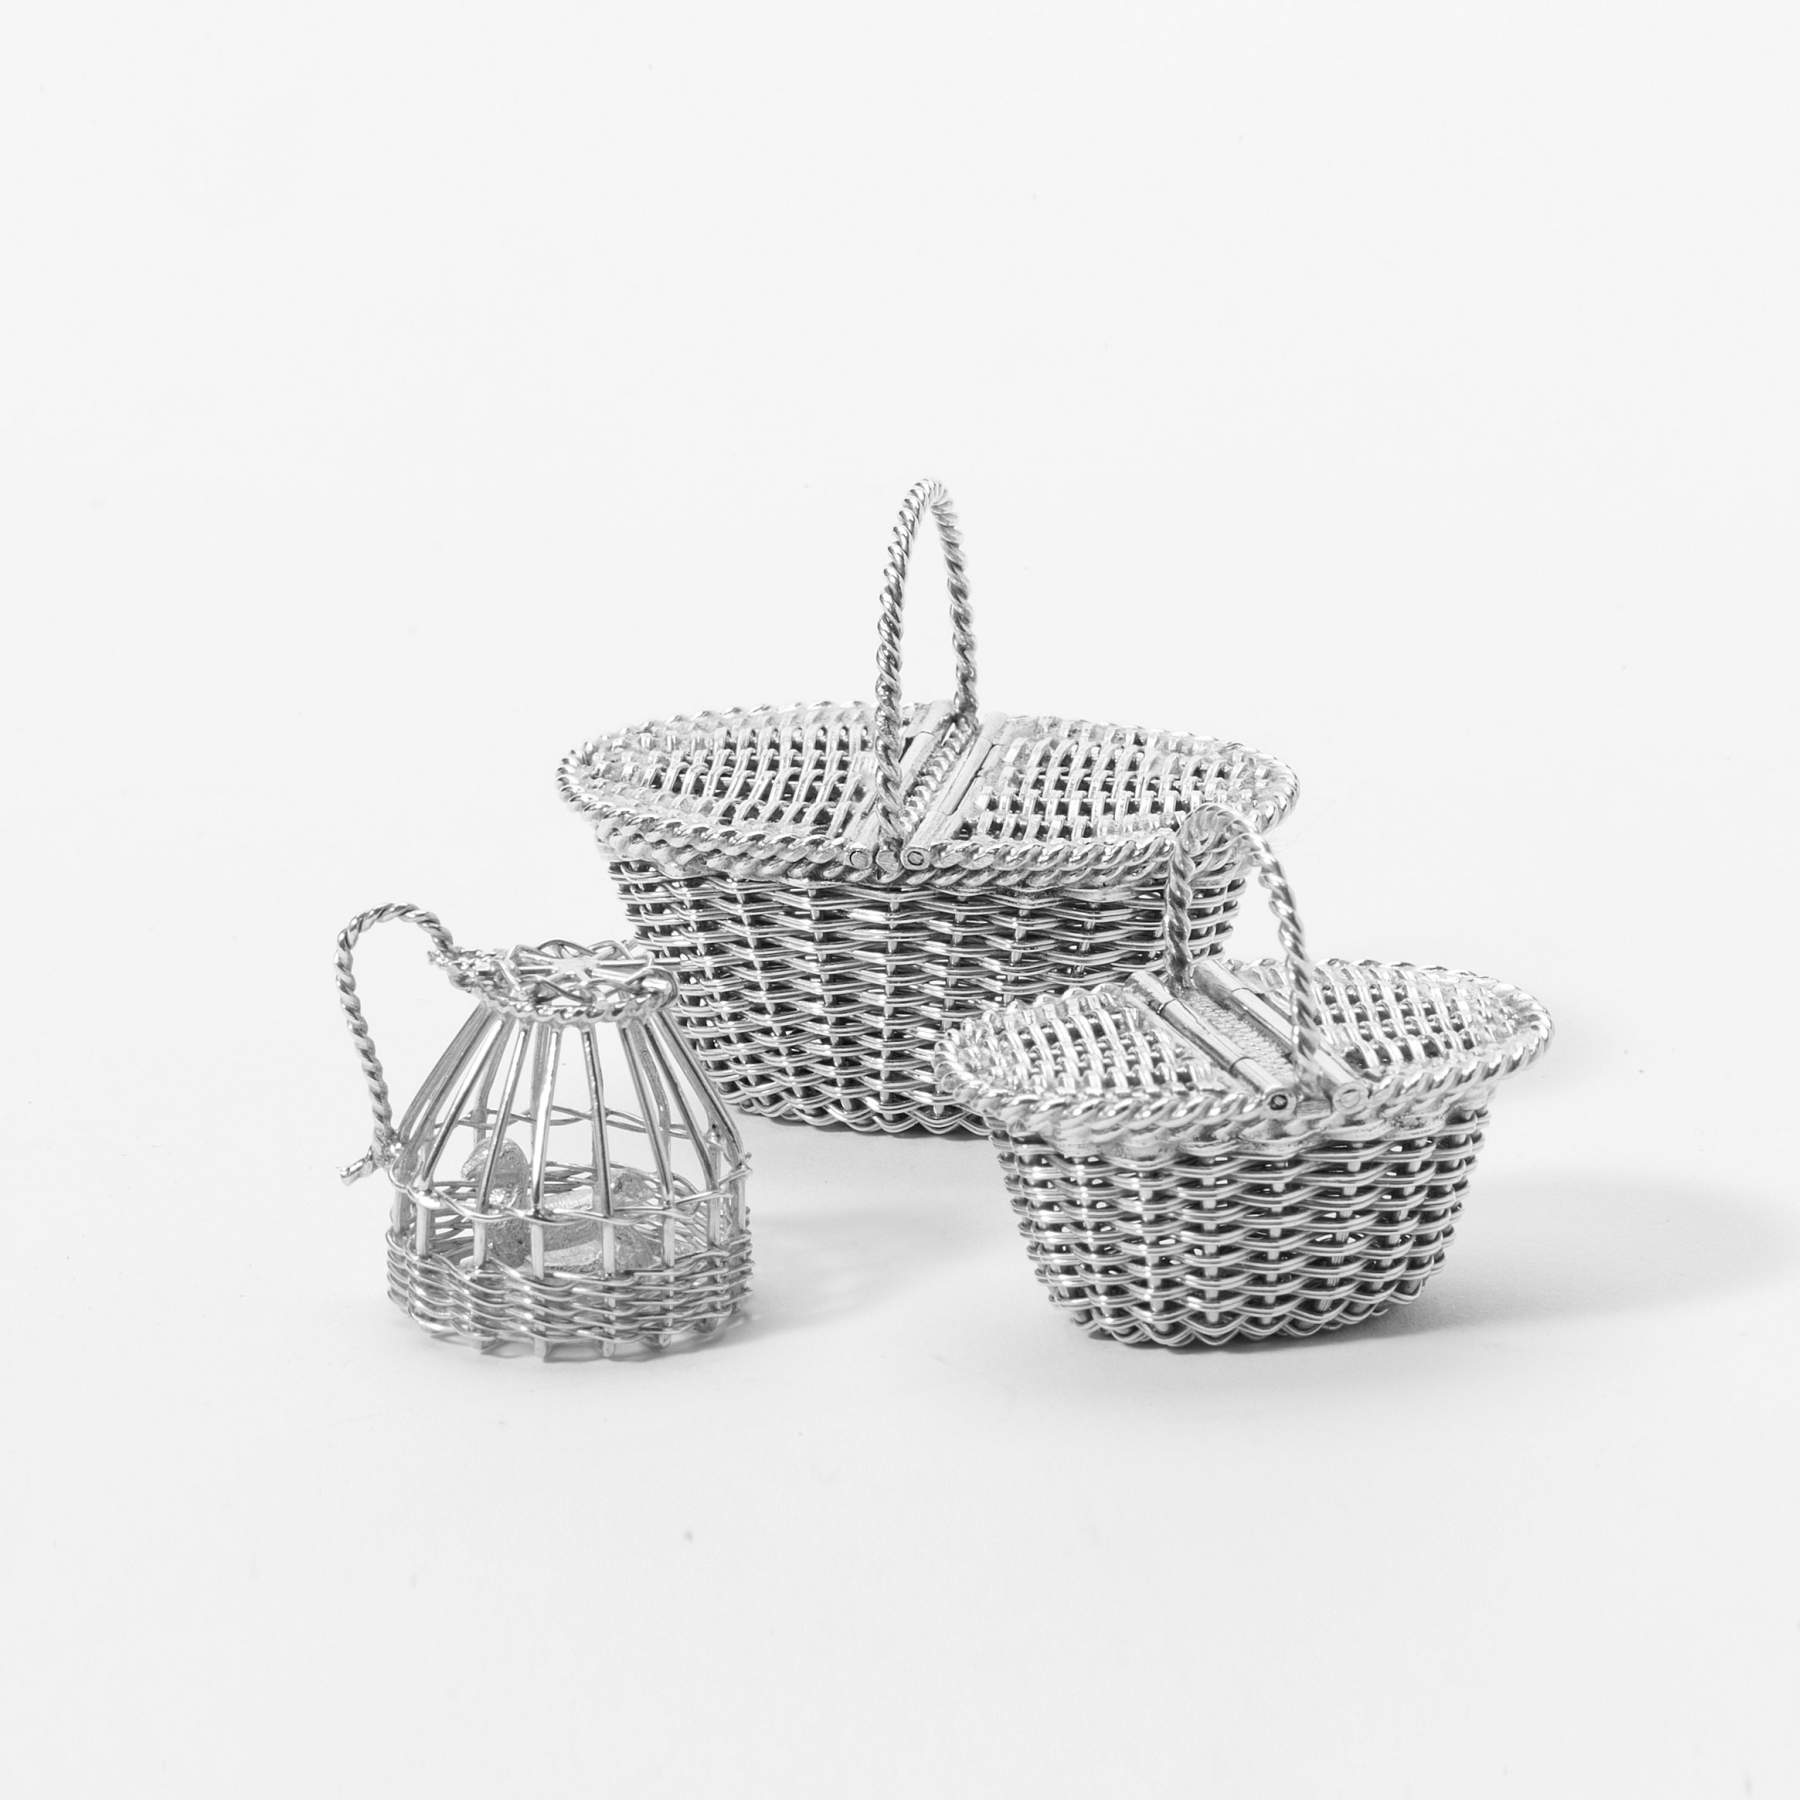 A  miniature silver basket with two ducks and two oval miniature shopping baskets of woven silver